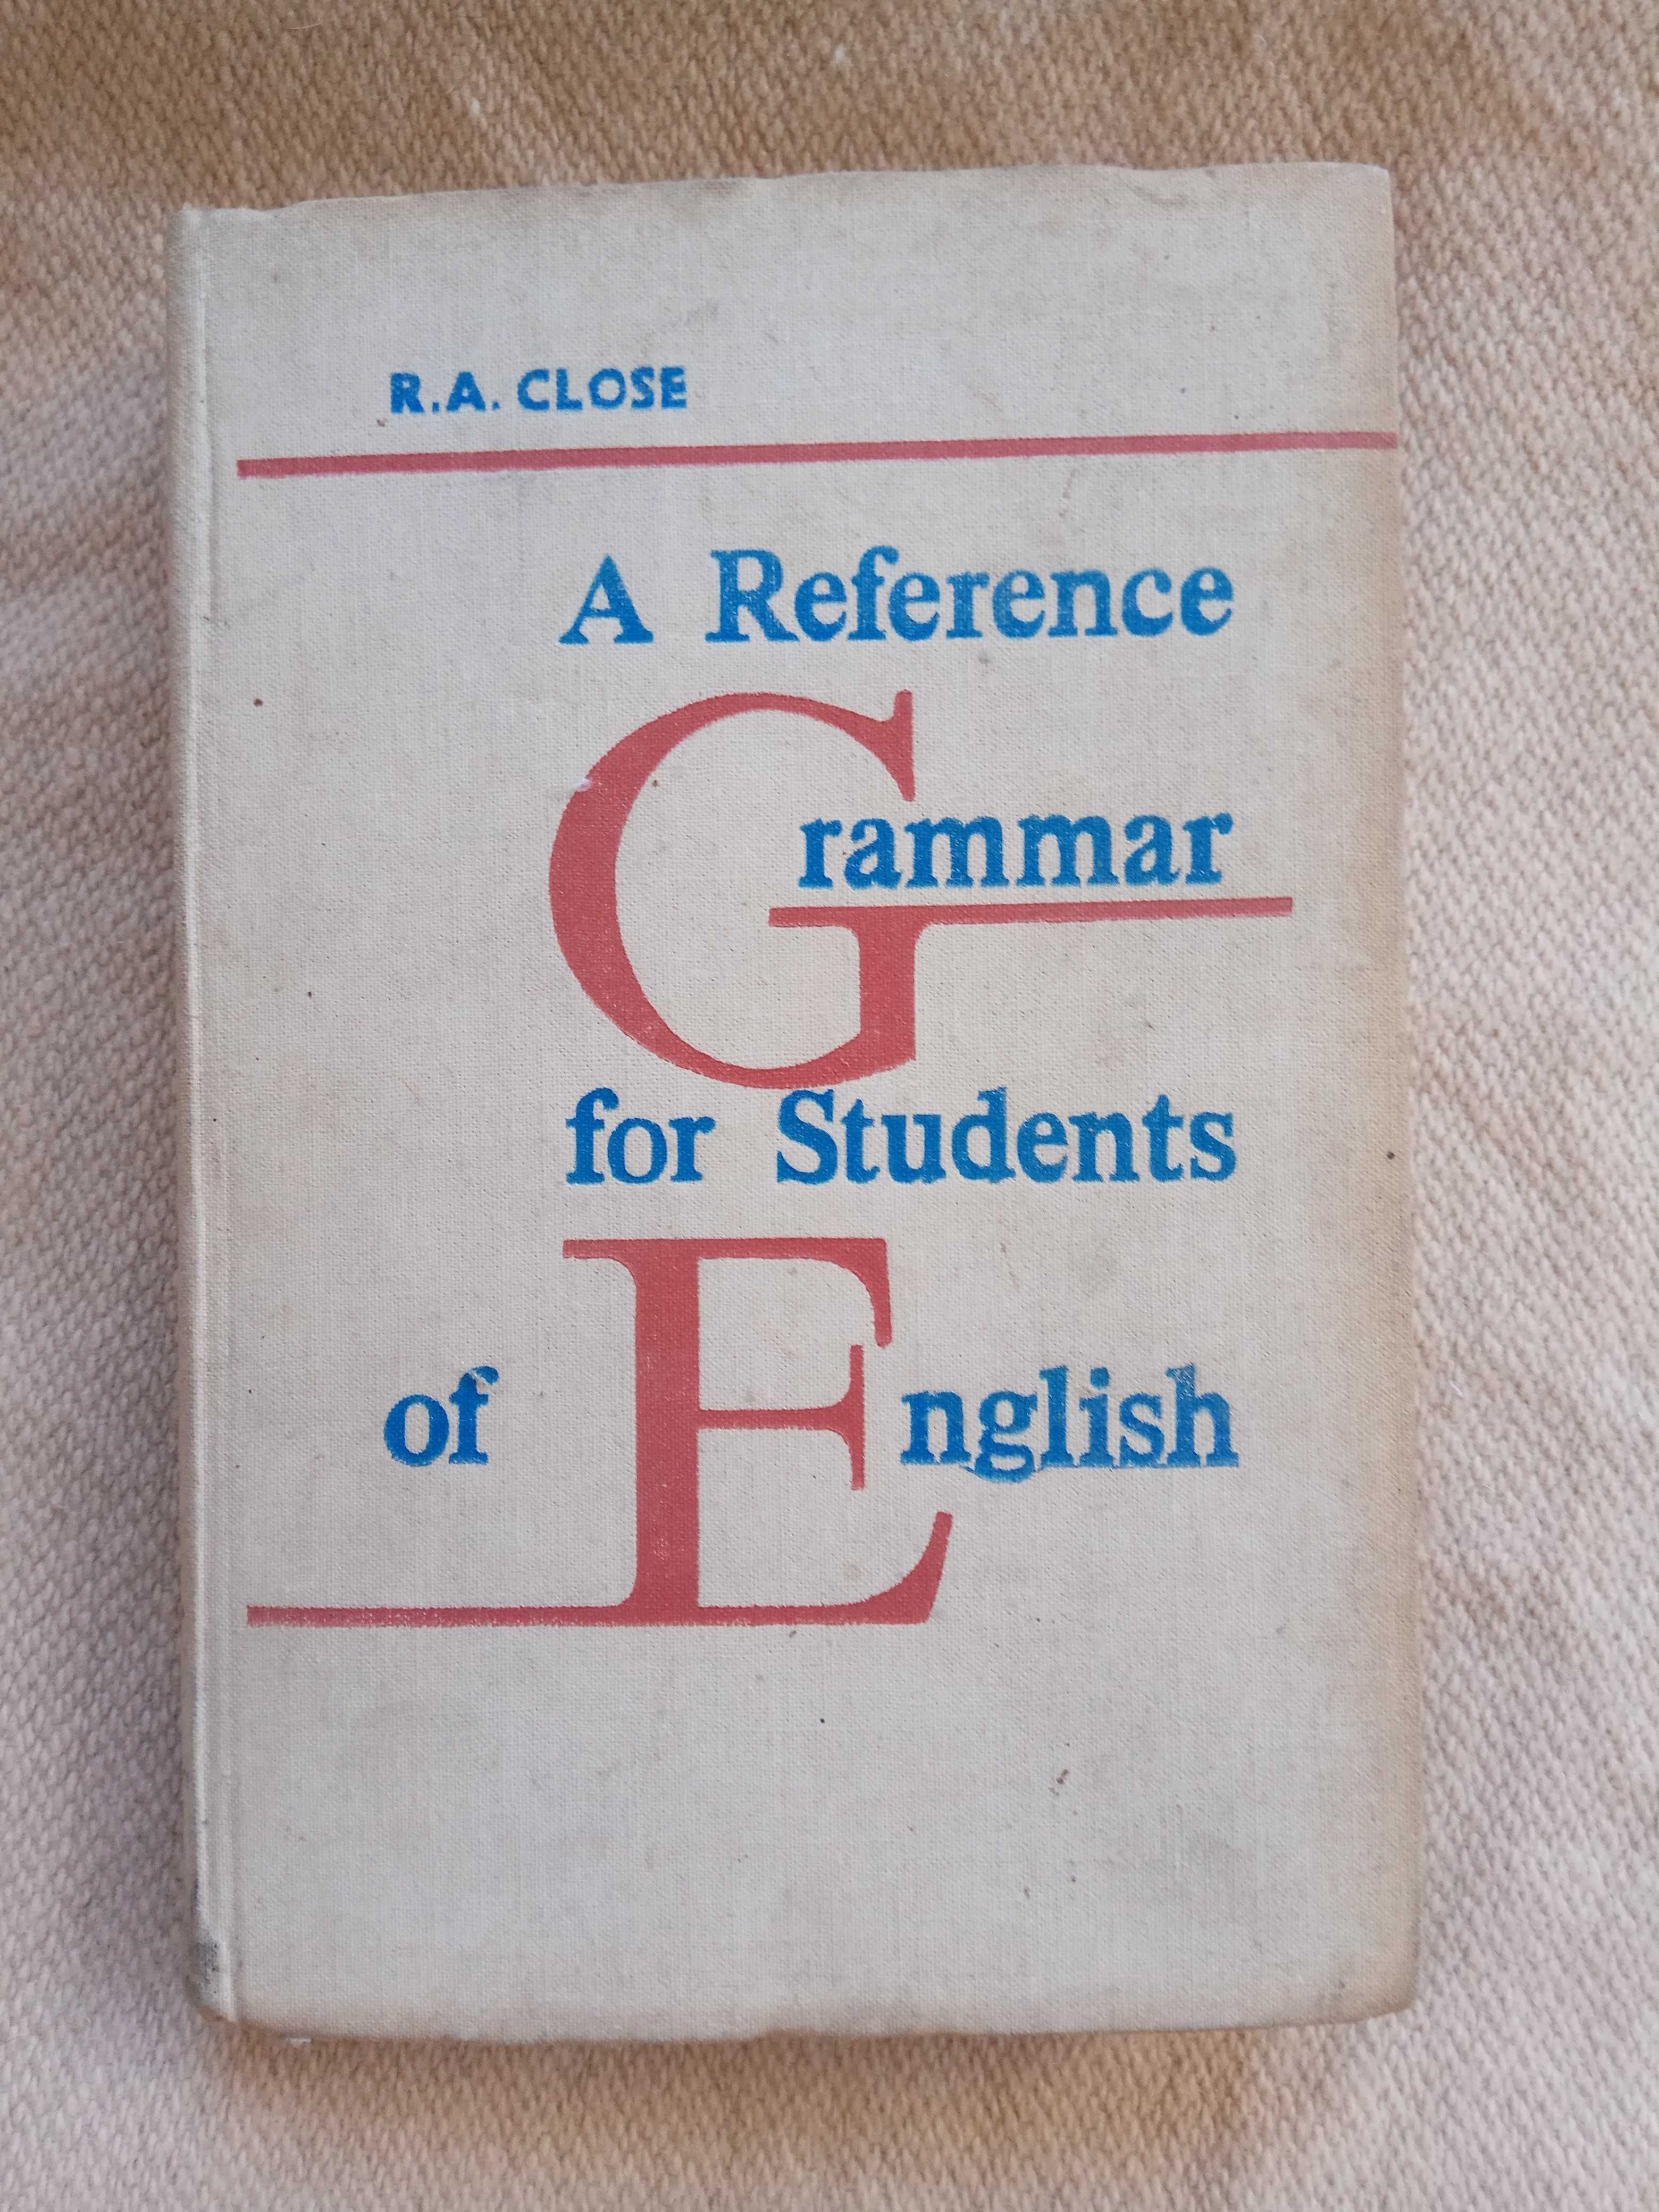 R.A.Close A reference grammar for students of English.